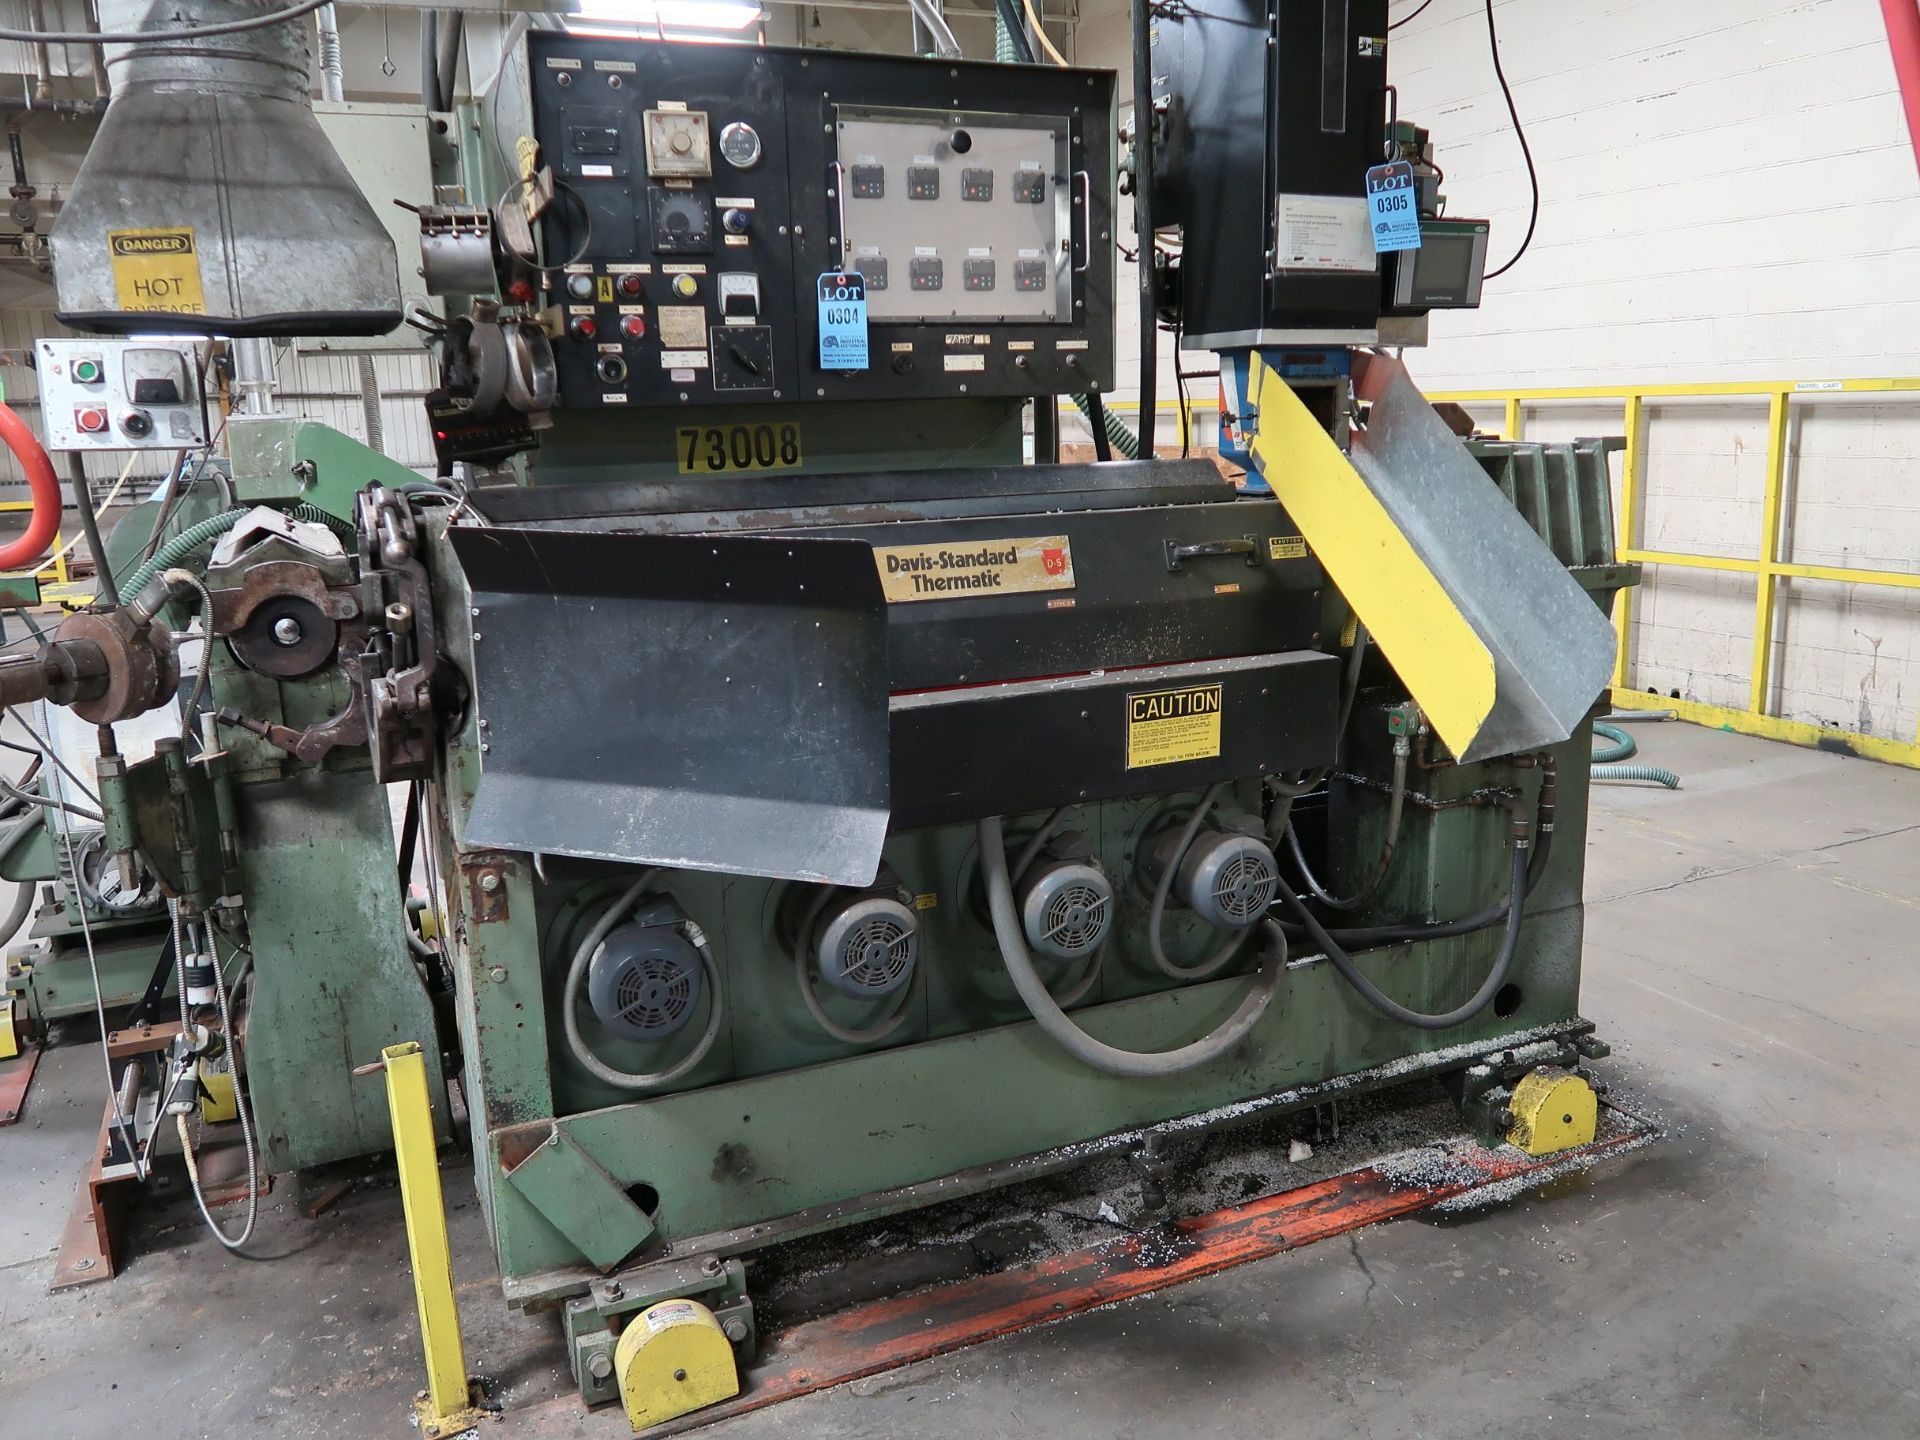 2.5" DAVIS STANDARD THERMATIC MODEL 25IN25 EXTRUDER; S/N K3743, 40 HP, MACHINE MOUNTED CONTROL